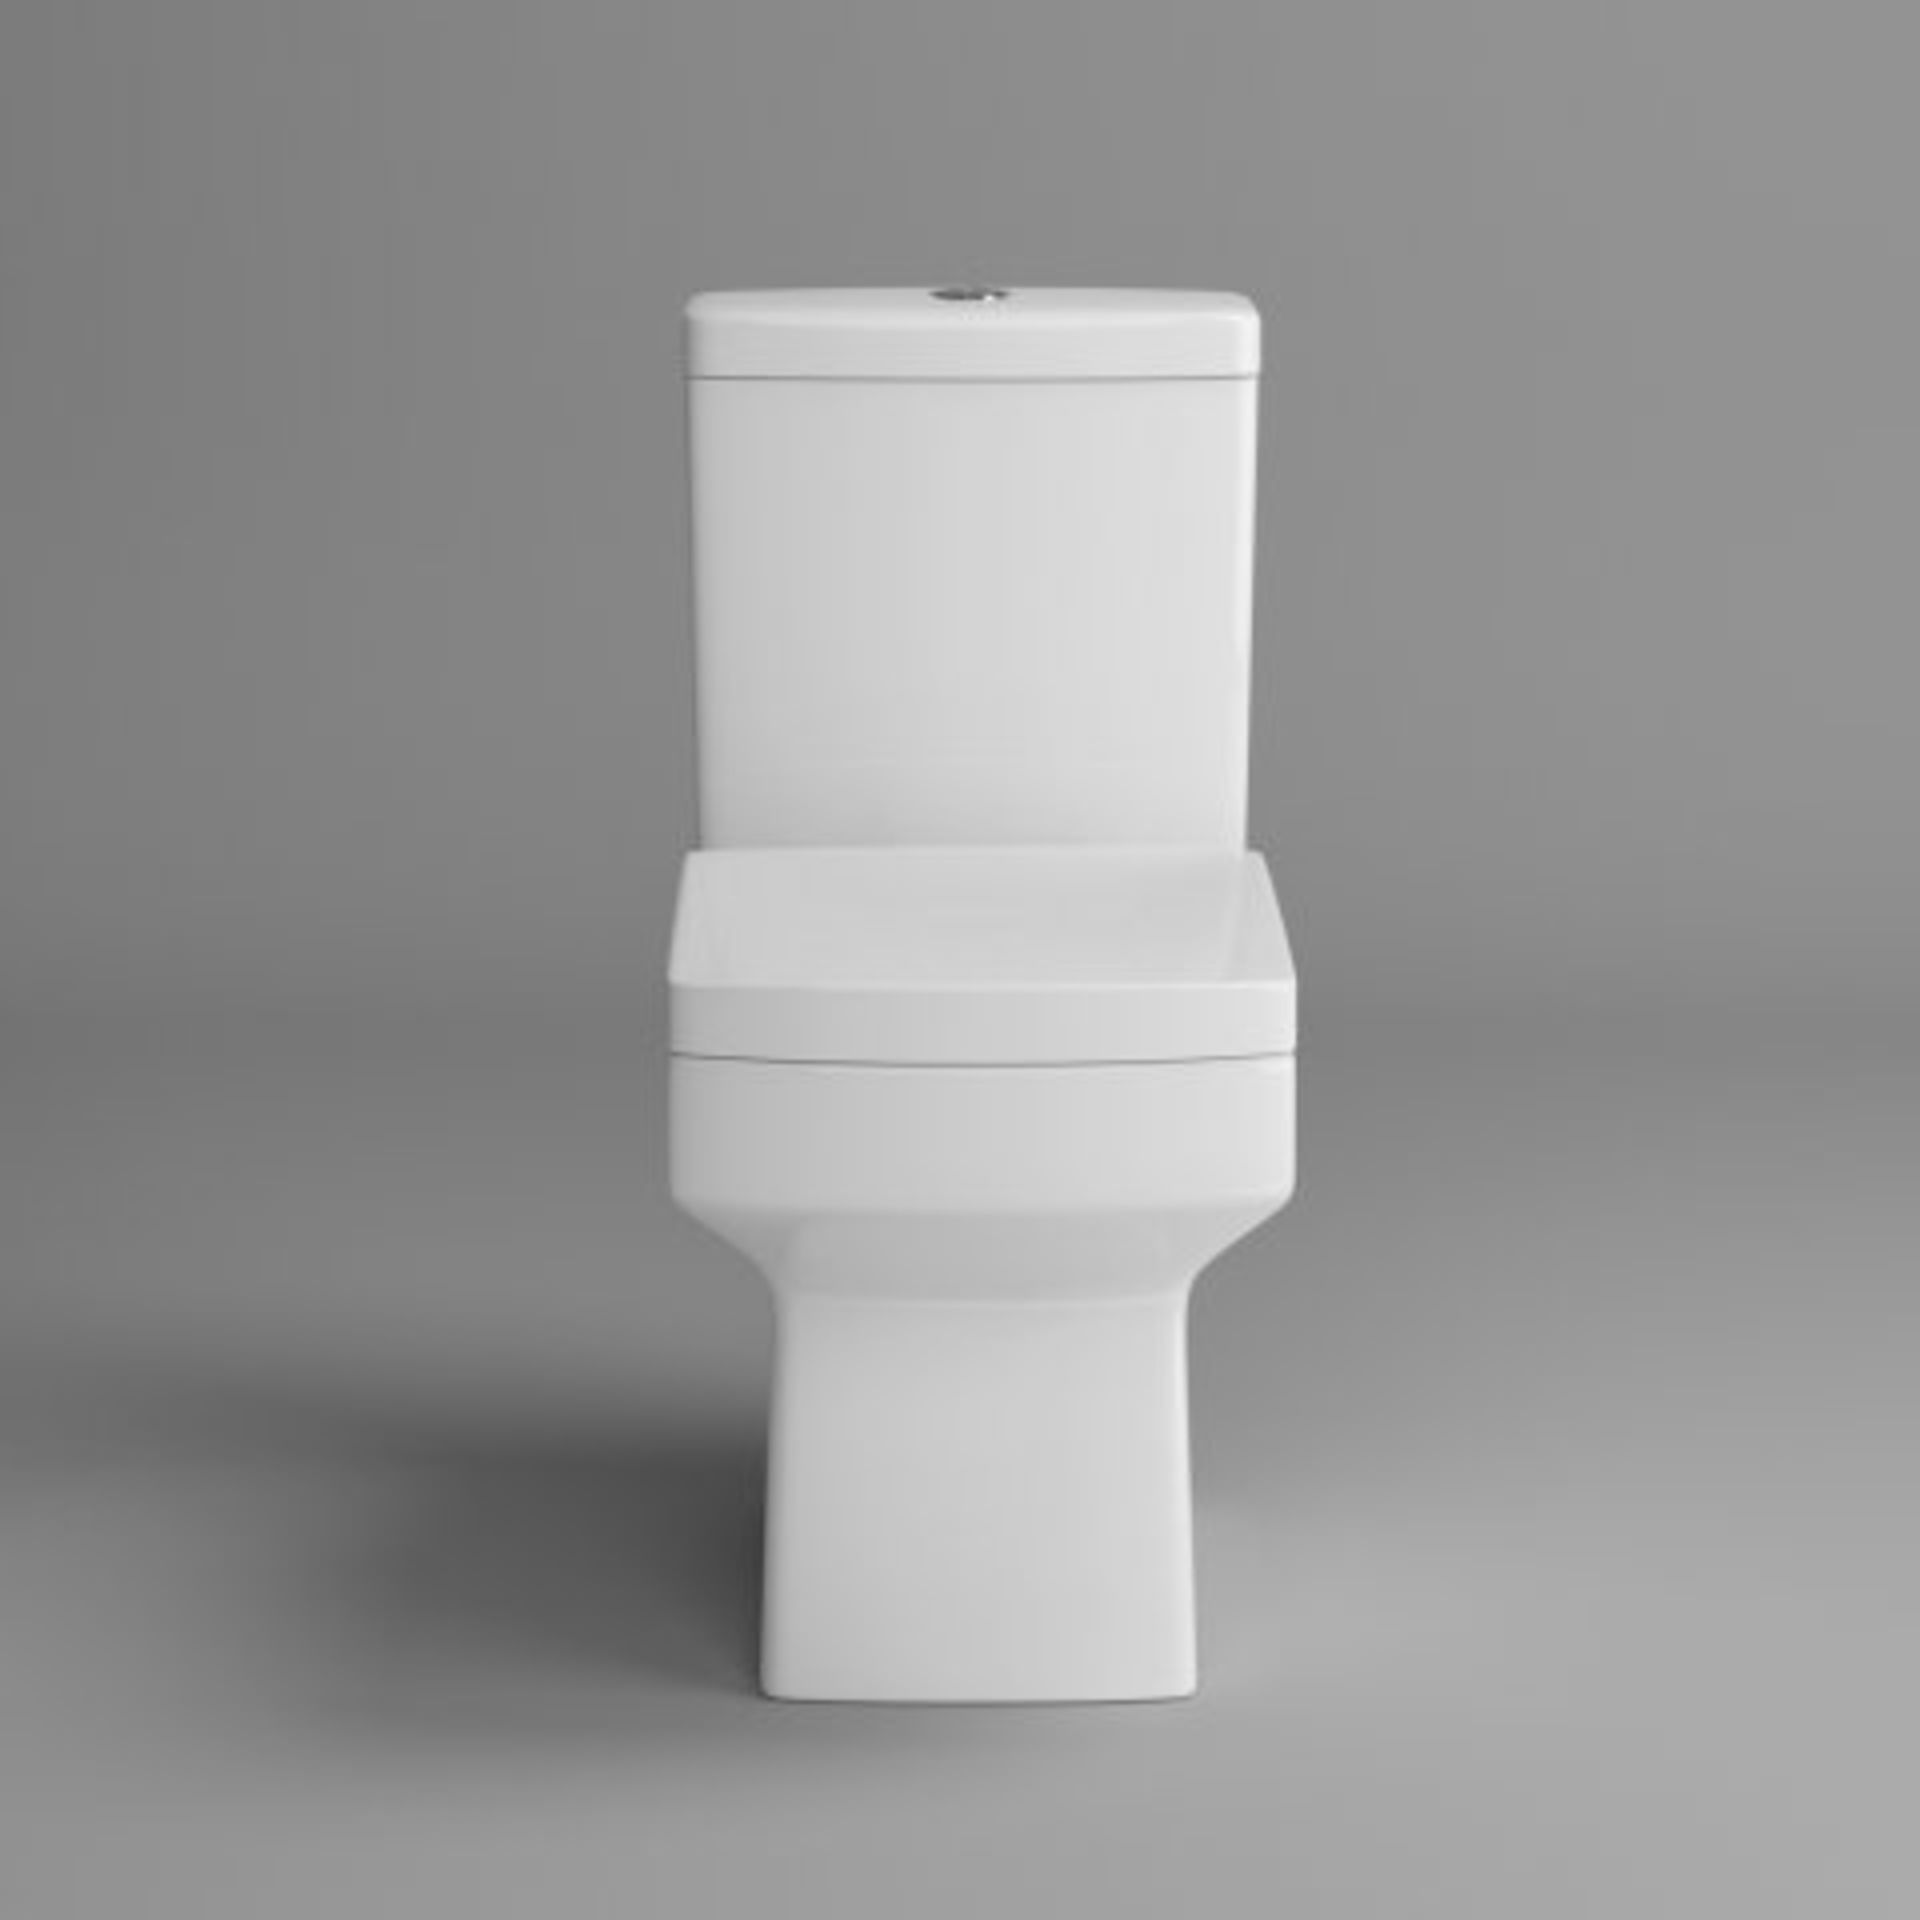 NEW & BOXED Belfort Close Coupled Toilet & Cistern inc Soft Close Seat. RRP £499.99.CC645.Long... - Image 2 of 2